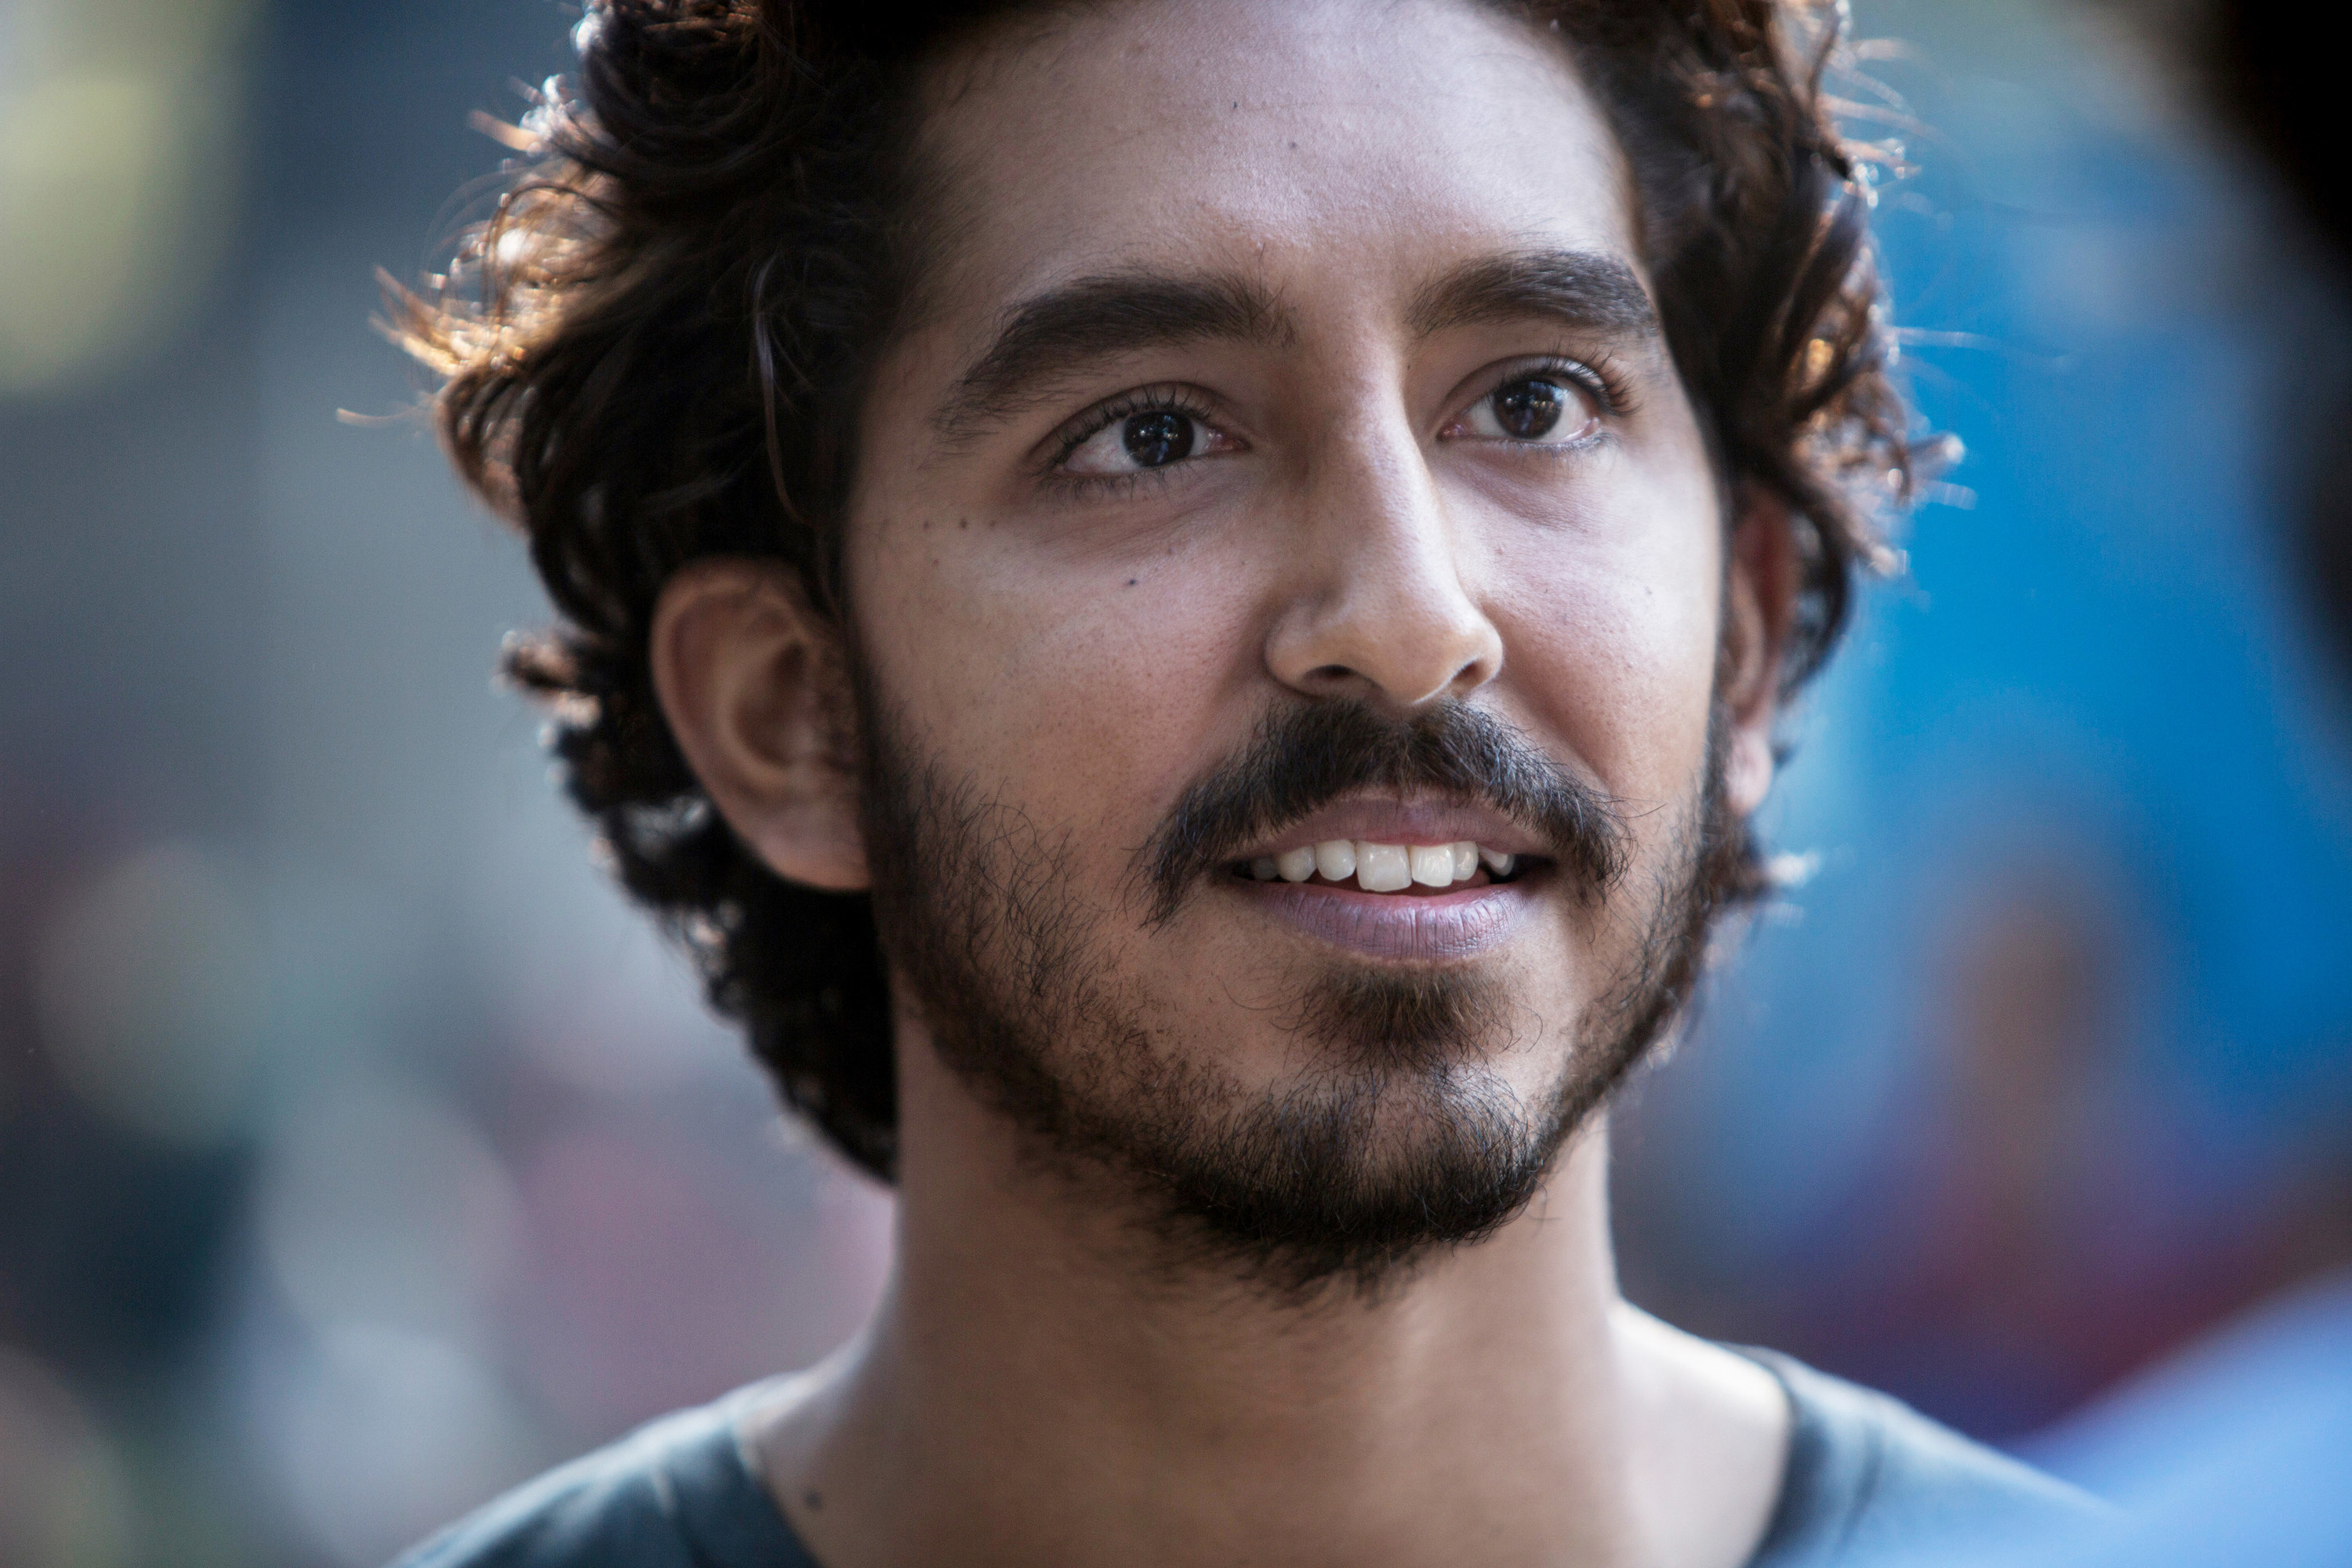 A close up of Dev Patel as he smiles slightly to show his teeth